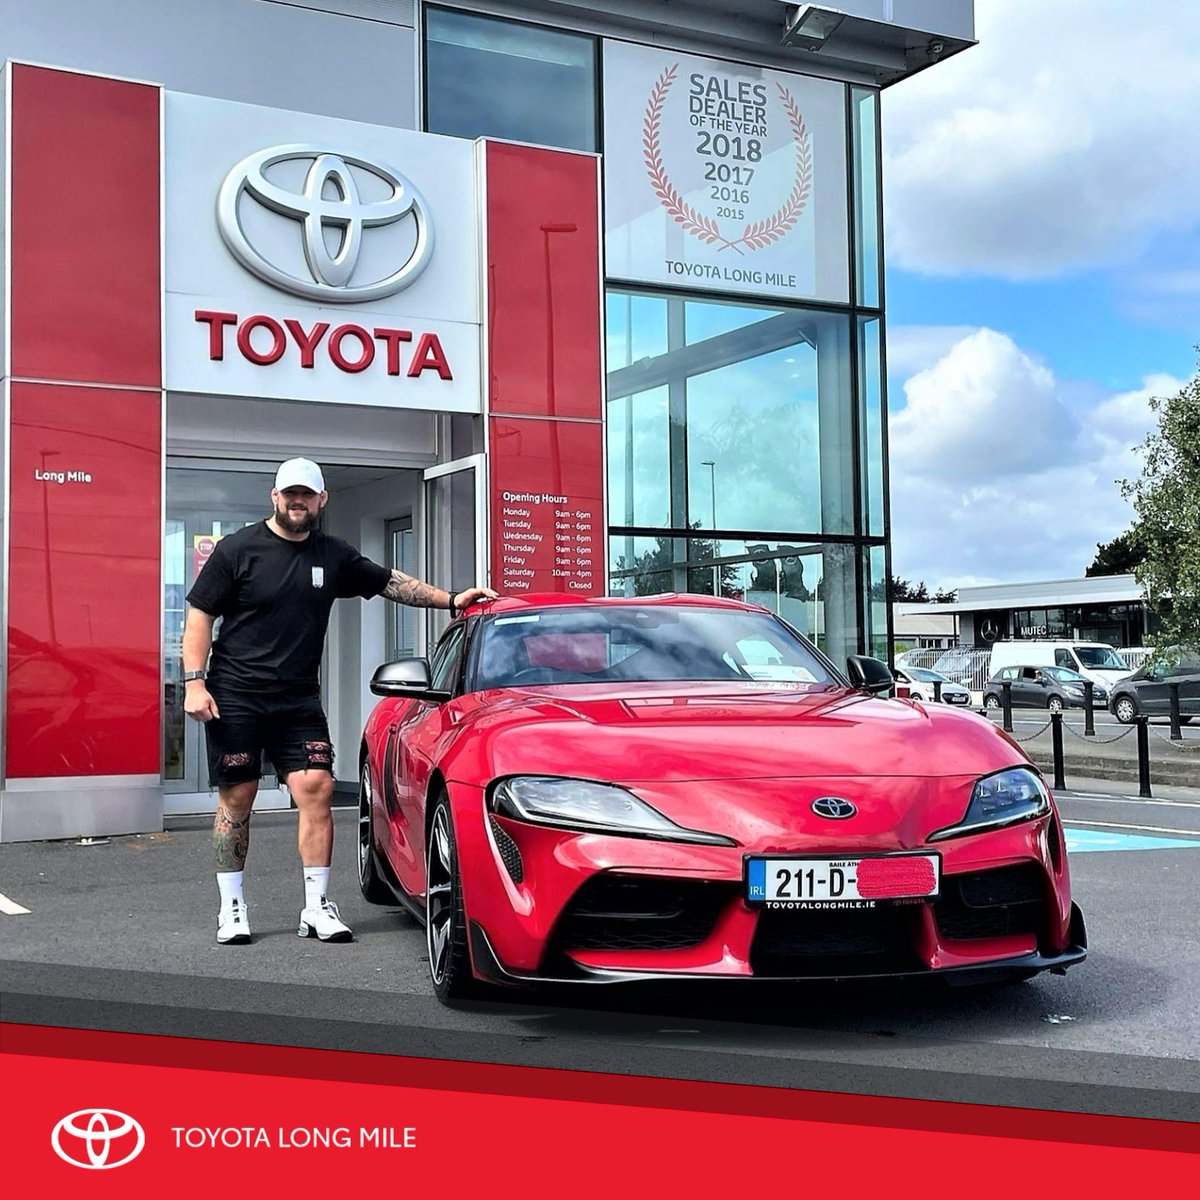 #FridayFeeling😍 Fantastic to see our Brand Ambassador @AindriuPorter up with us this afternoon at Toyota Long Mile and nice to be able to give him a test pre-season run in this stunning new Toyota GR Supra Happy Driving for the weekend, Andrew!! #Toyota #Supra